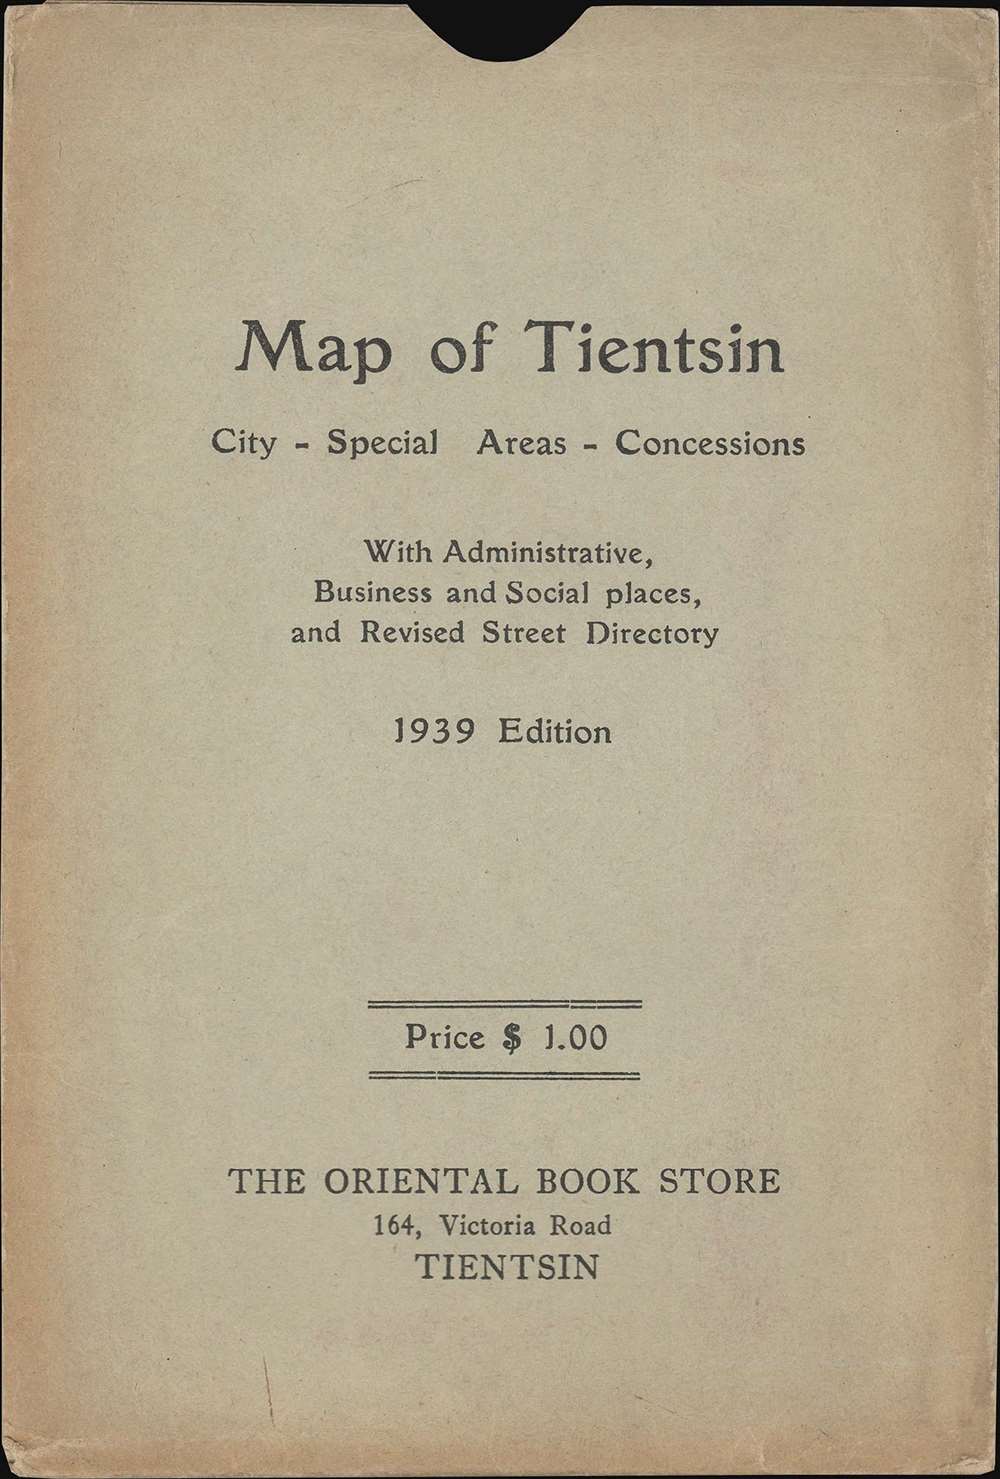 Map of Tientsin. City, Special Areas, Concessions, with Administrative, Business, and Social places and Revised Street Directory. - Alternate View 1